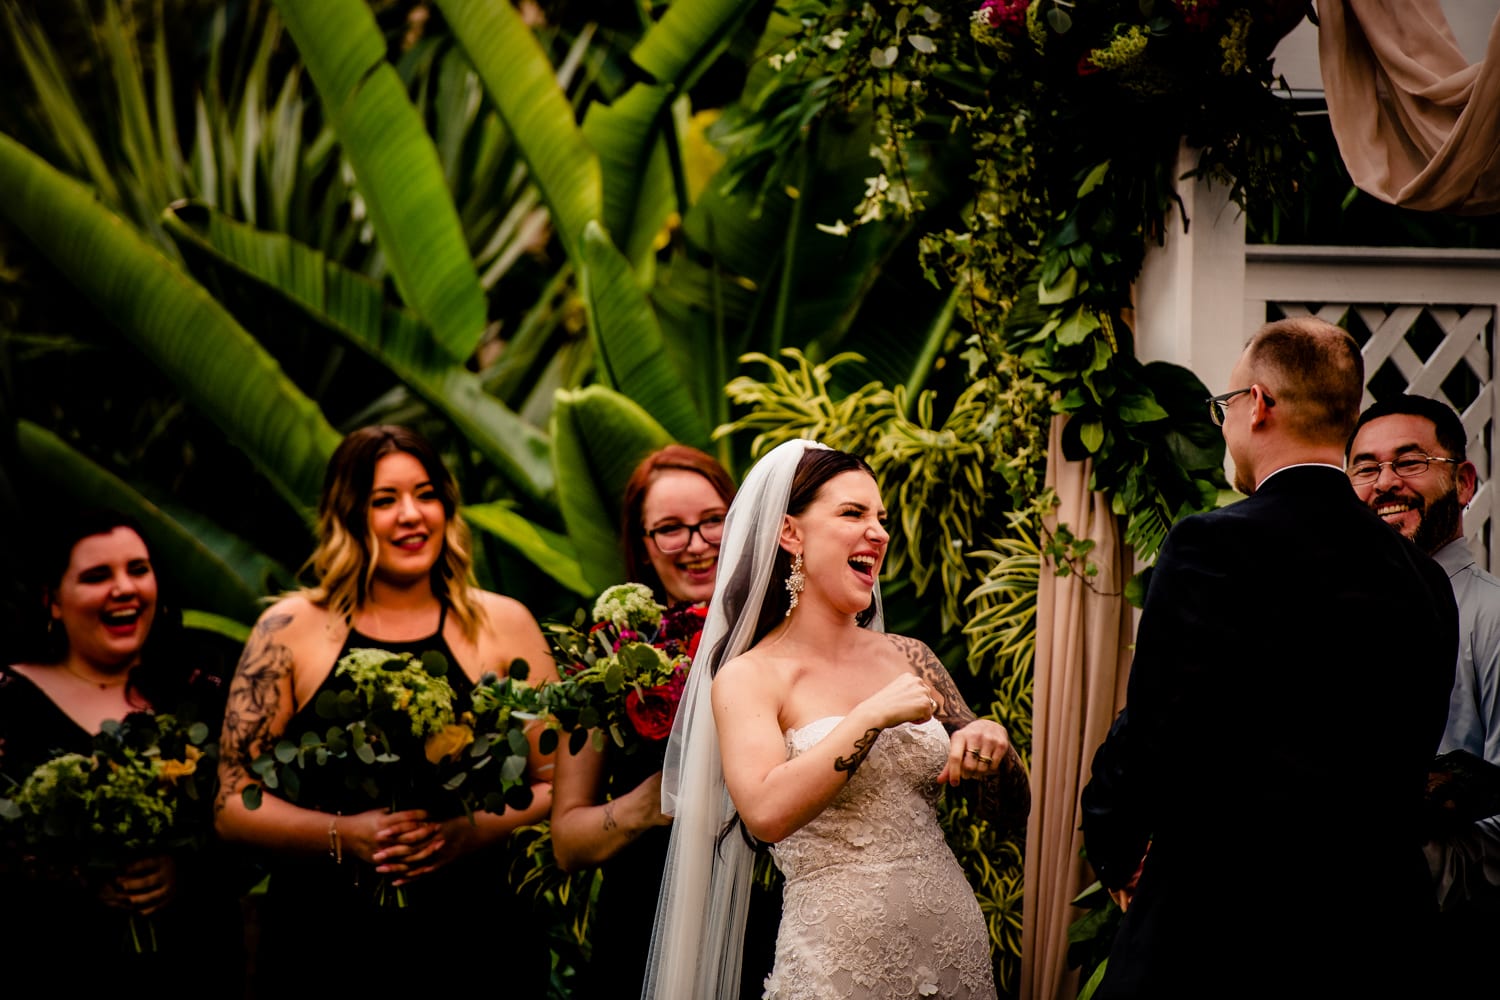 A Hemingway Home wedding with a laughing bride and groom during their ceremony.